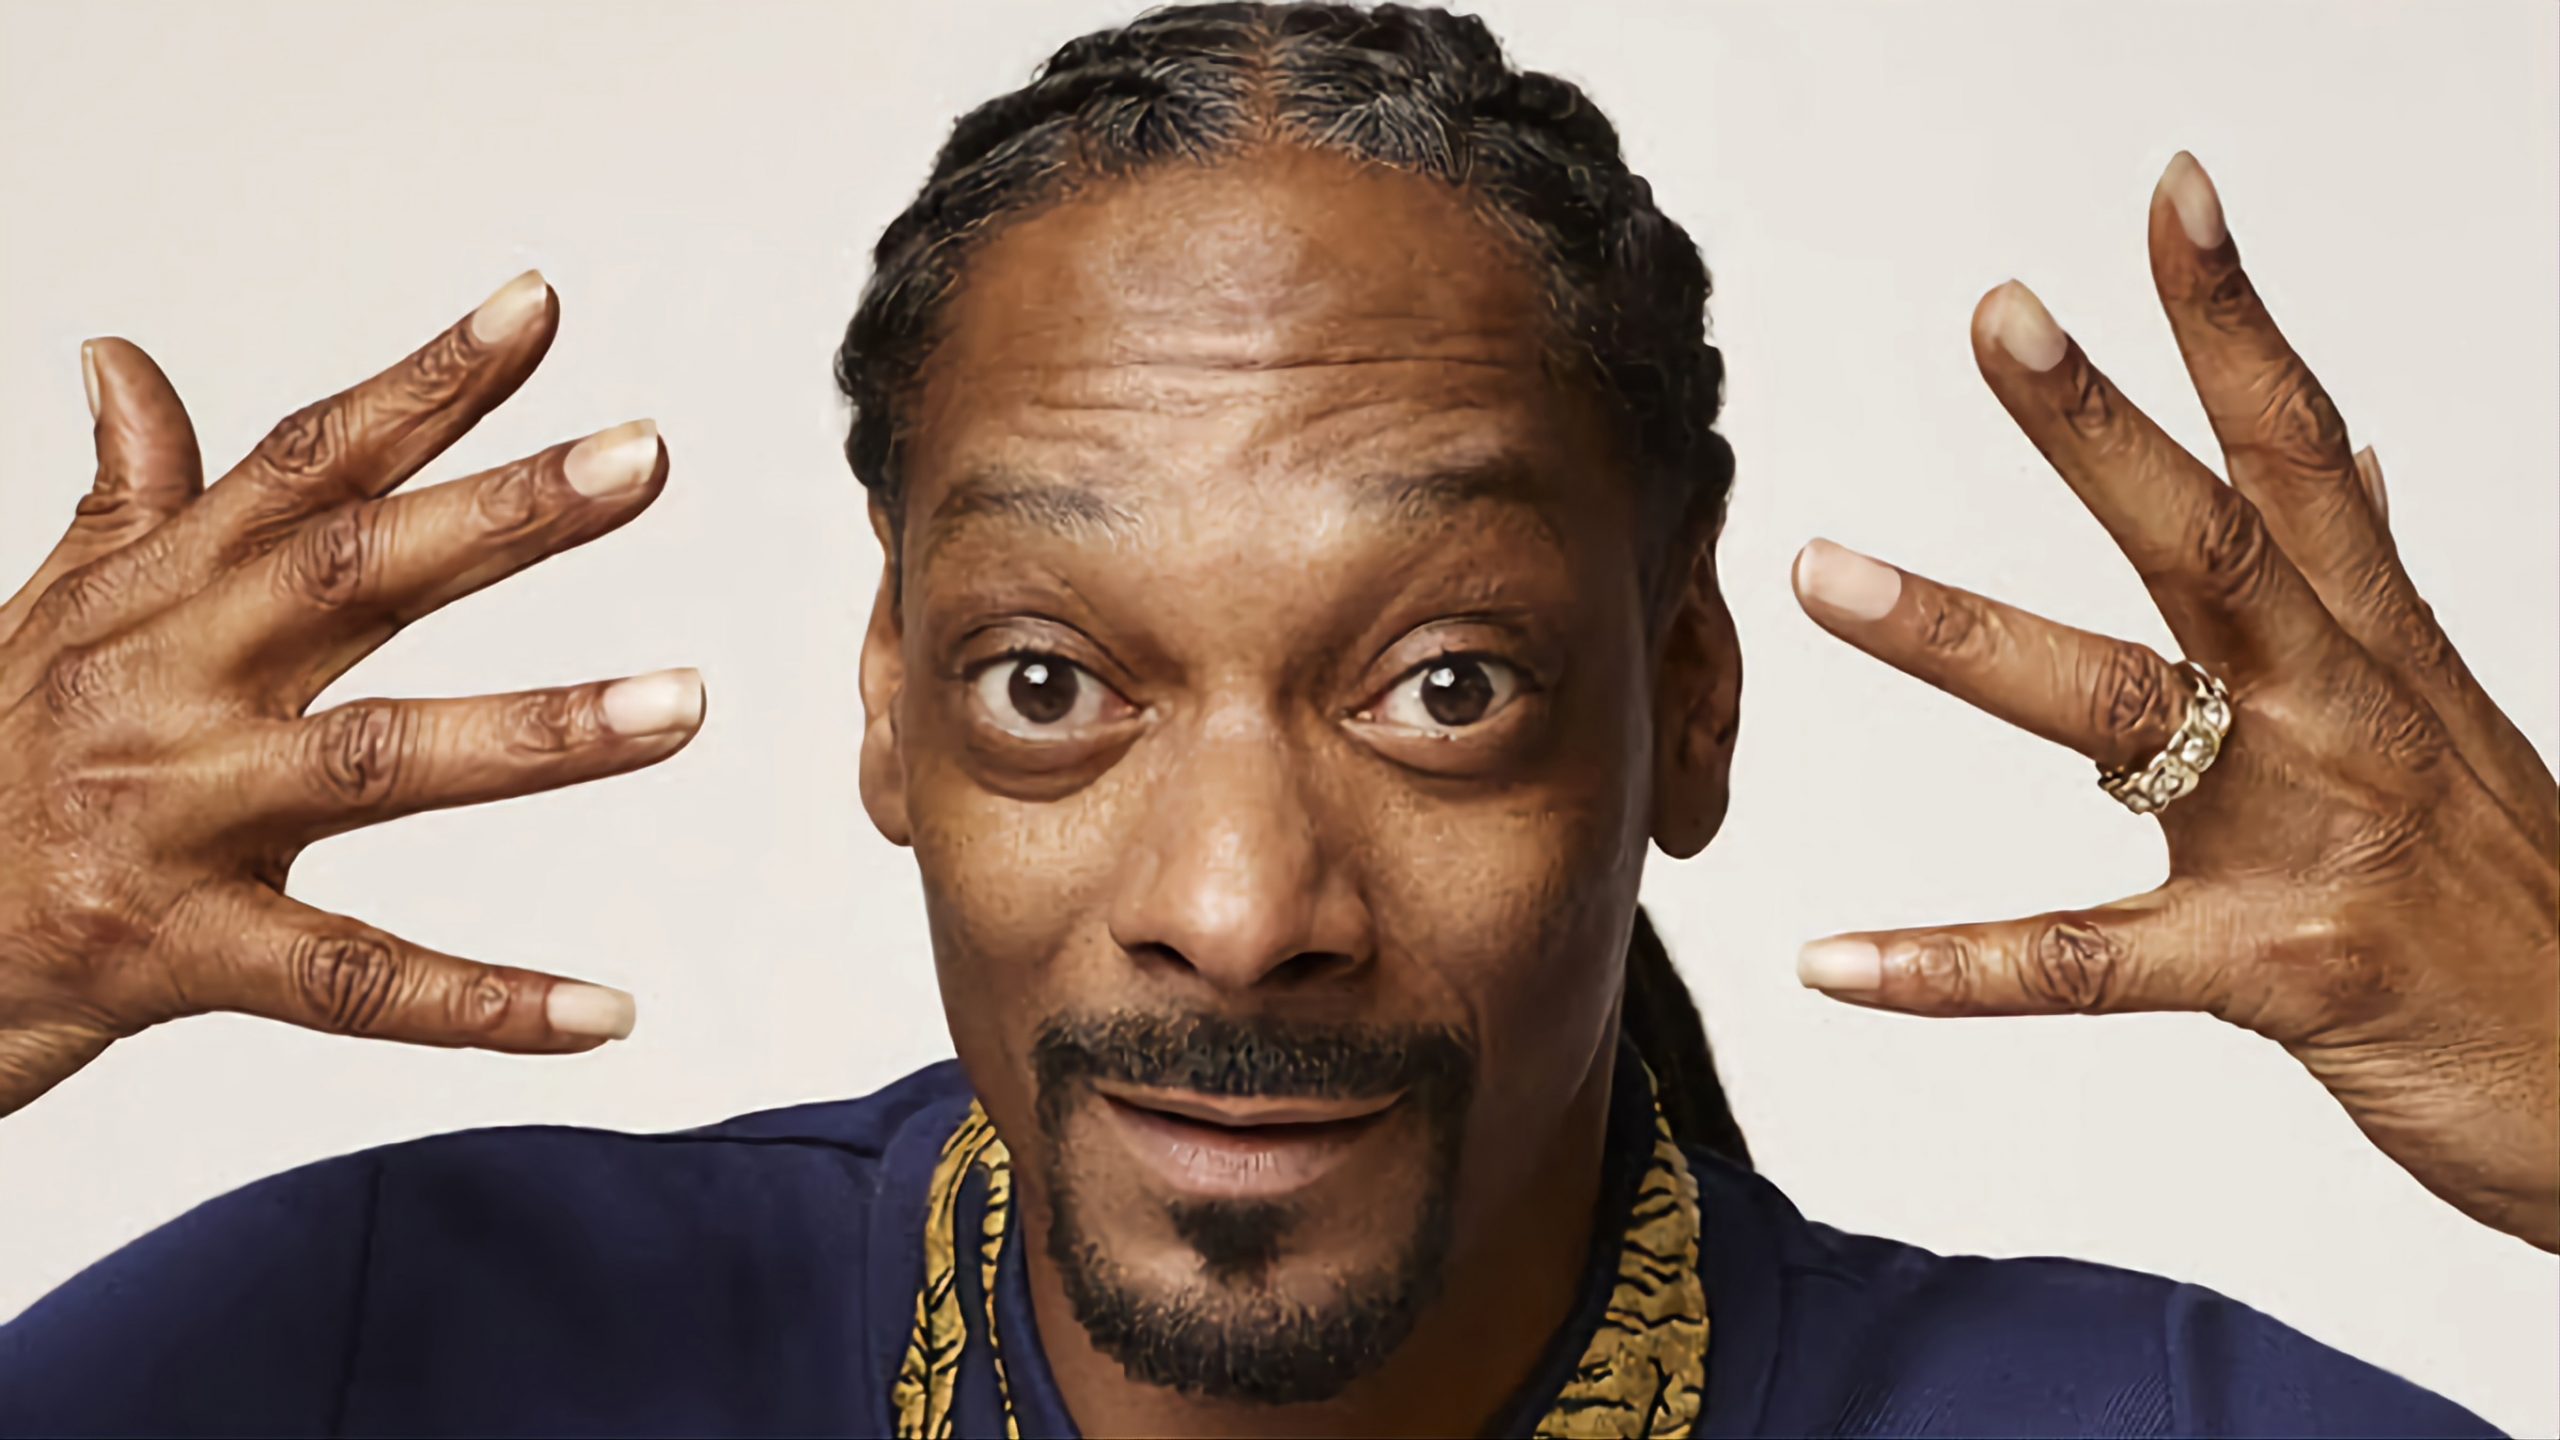 Snoop Dogg Invites Fans To His L.A Mansion As A Part Of Death Row NFT Project